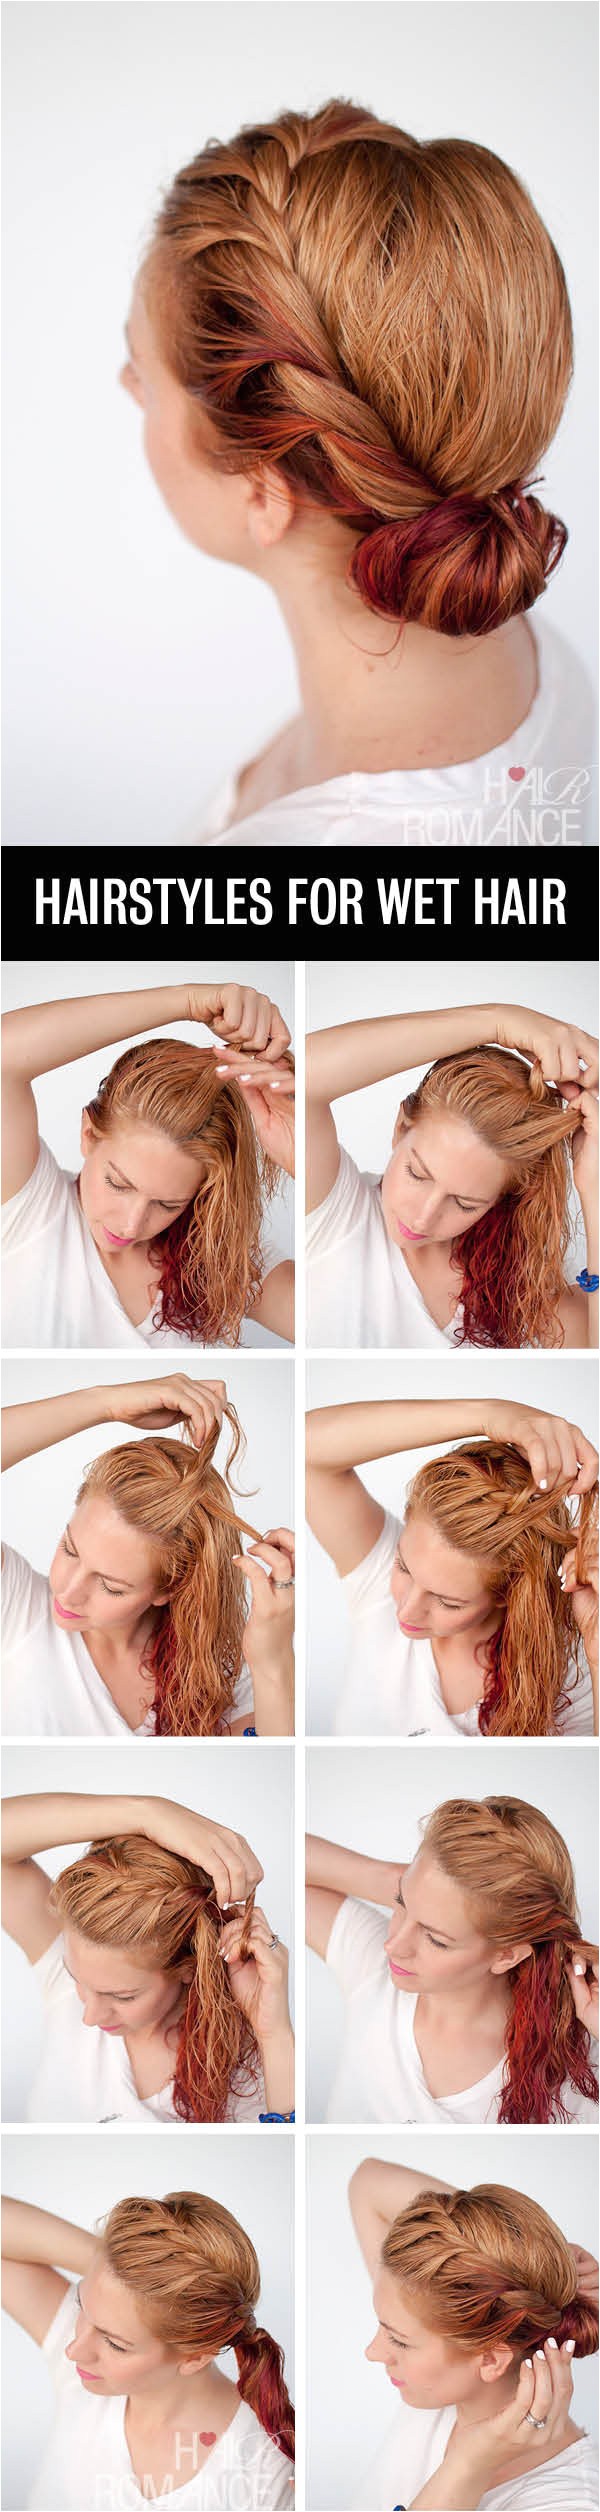 ready fast with 7 easy hairstyle tutorials for wet hair